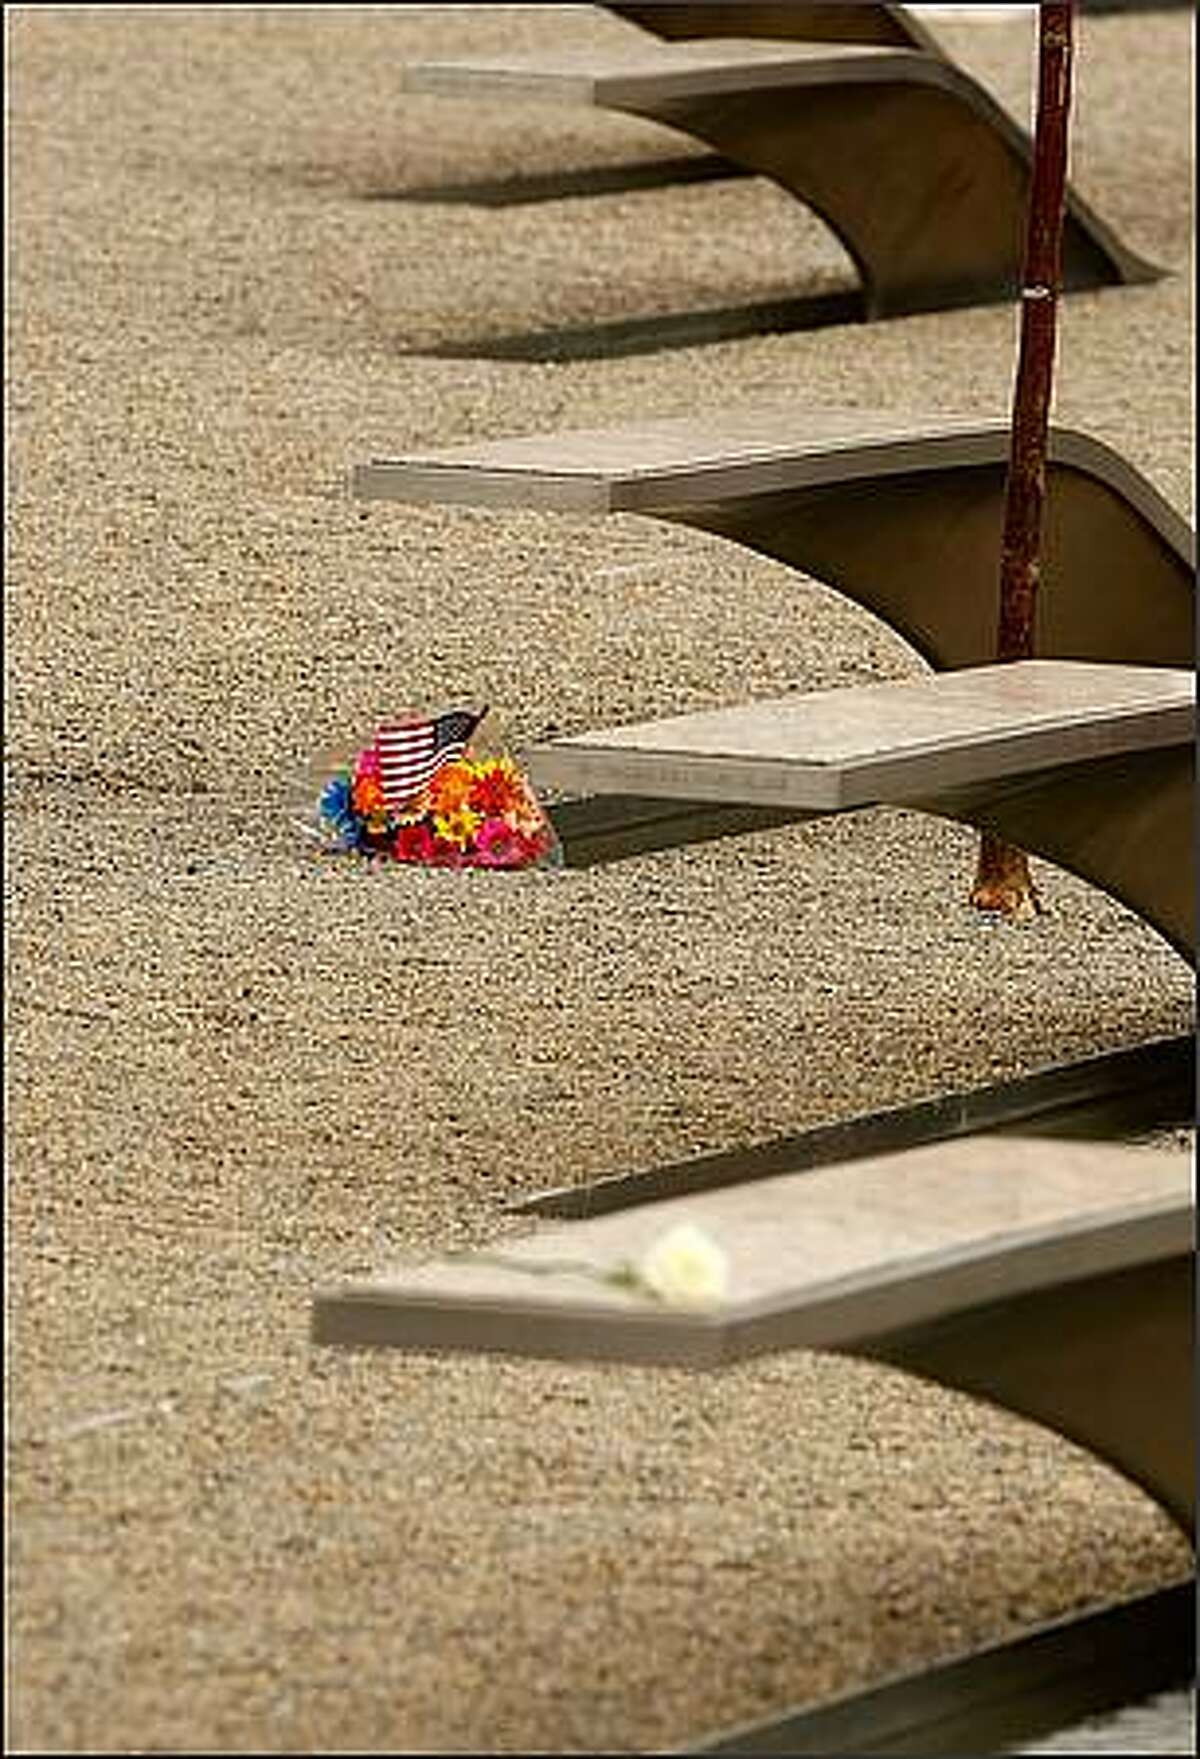 Family members leave flowers on the "memorial units" at the Pentagon Memorial after the dedication of the Pentagon Memorial September 11, 2008 in Arlington, Virginia. U.S. President George W. Bush will dedicate the memorial, made up of 184 "memorial units" each dedicated to an individual victim killed at the Pentagon when American Airlines Flight 77 slammed into the Department of Defense's headquarters on September 11, 2001. (Photo by Chip Somodevilla/Getty Images)